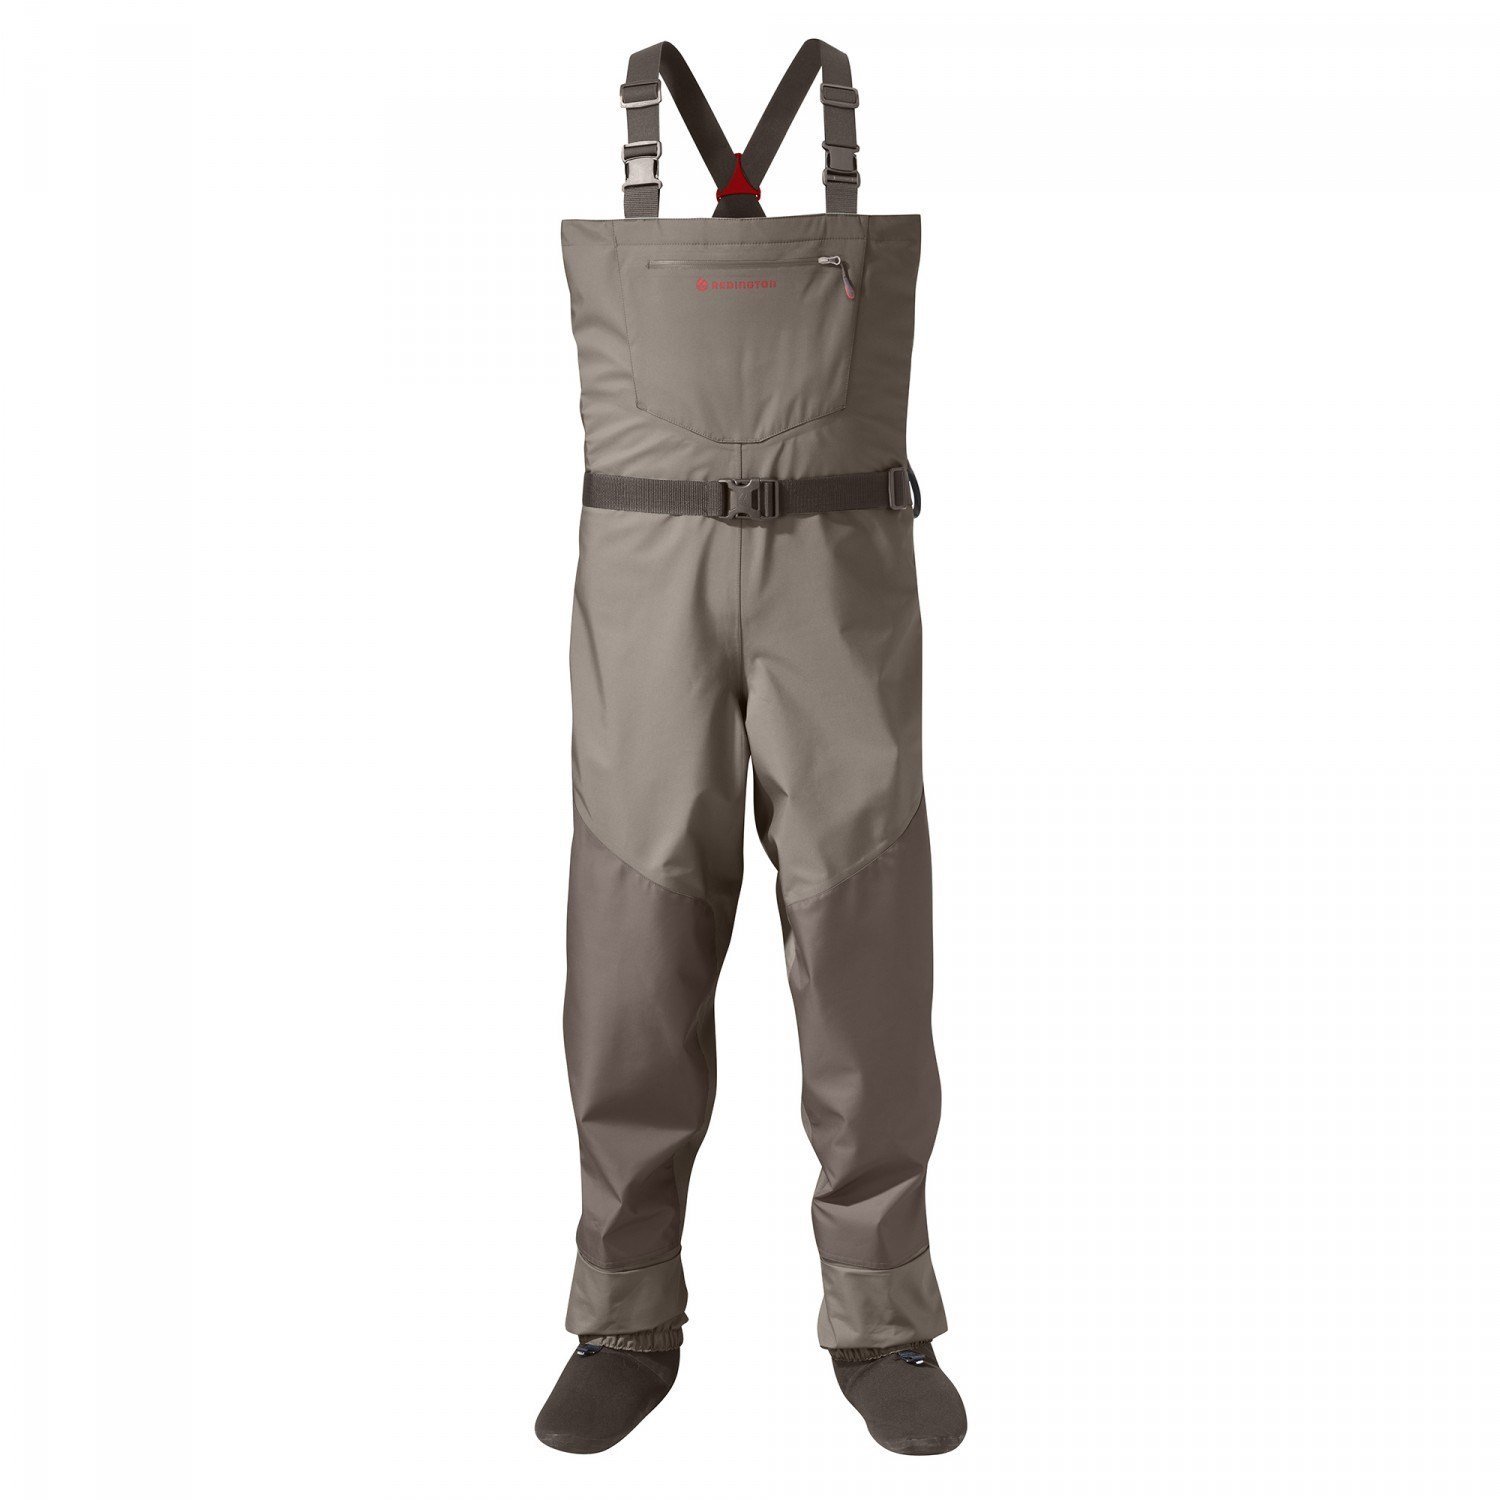 Details about   Clearance New Daiwa Breathable Chest Waders Khaki All Sizes 